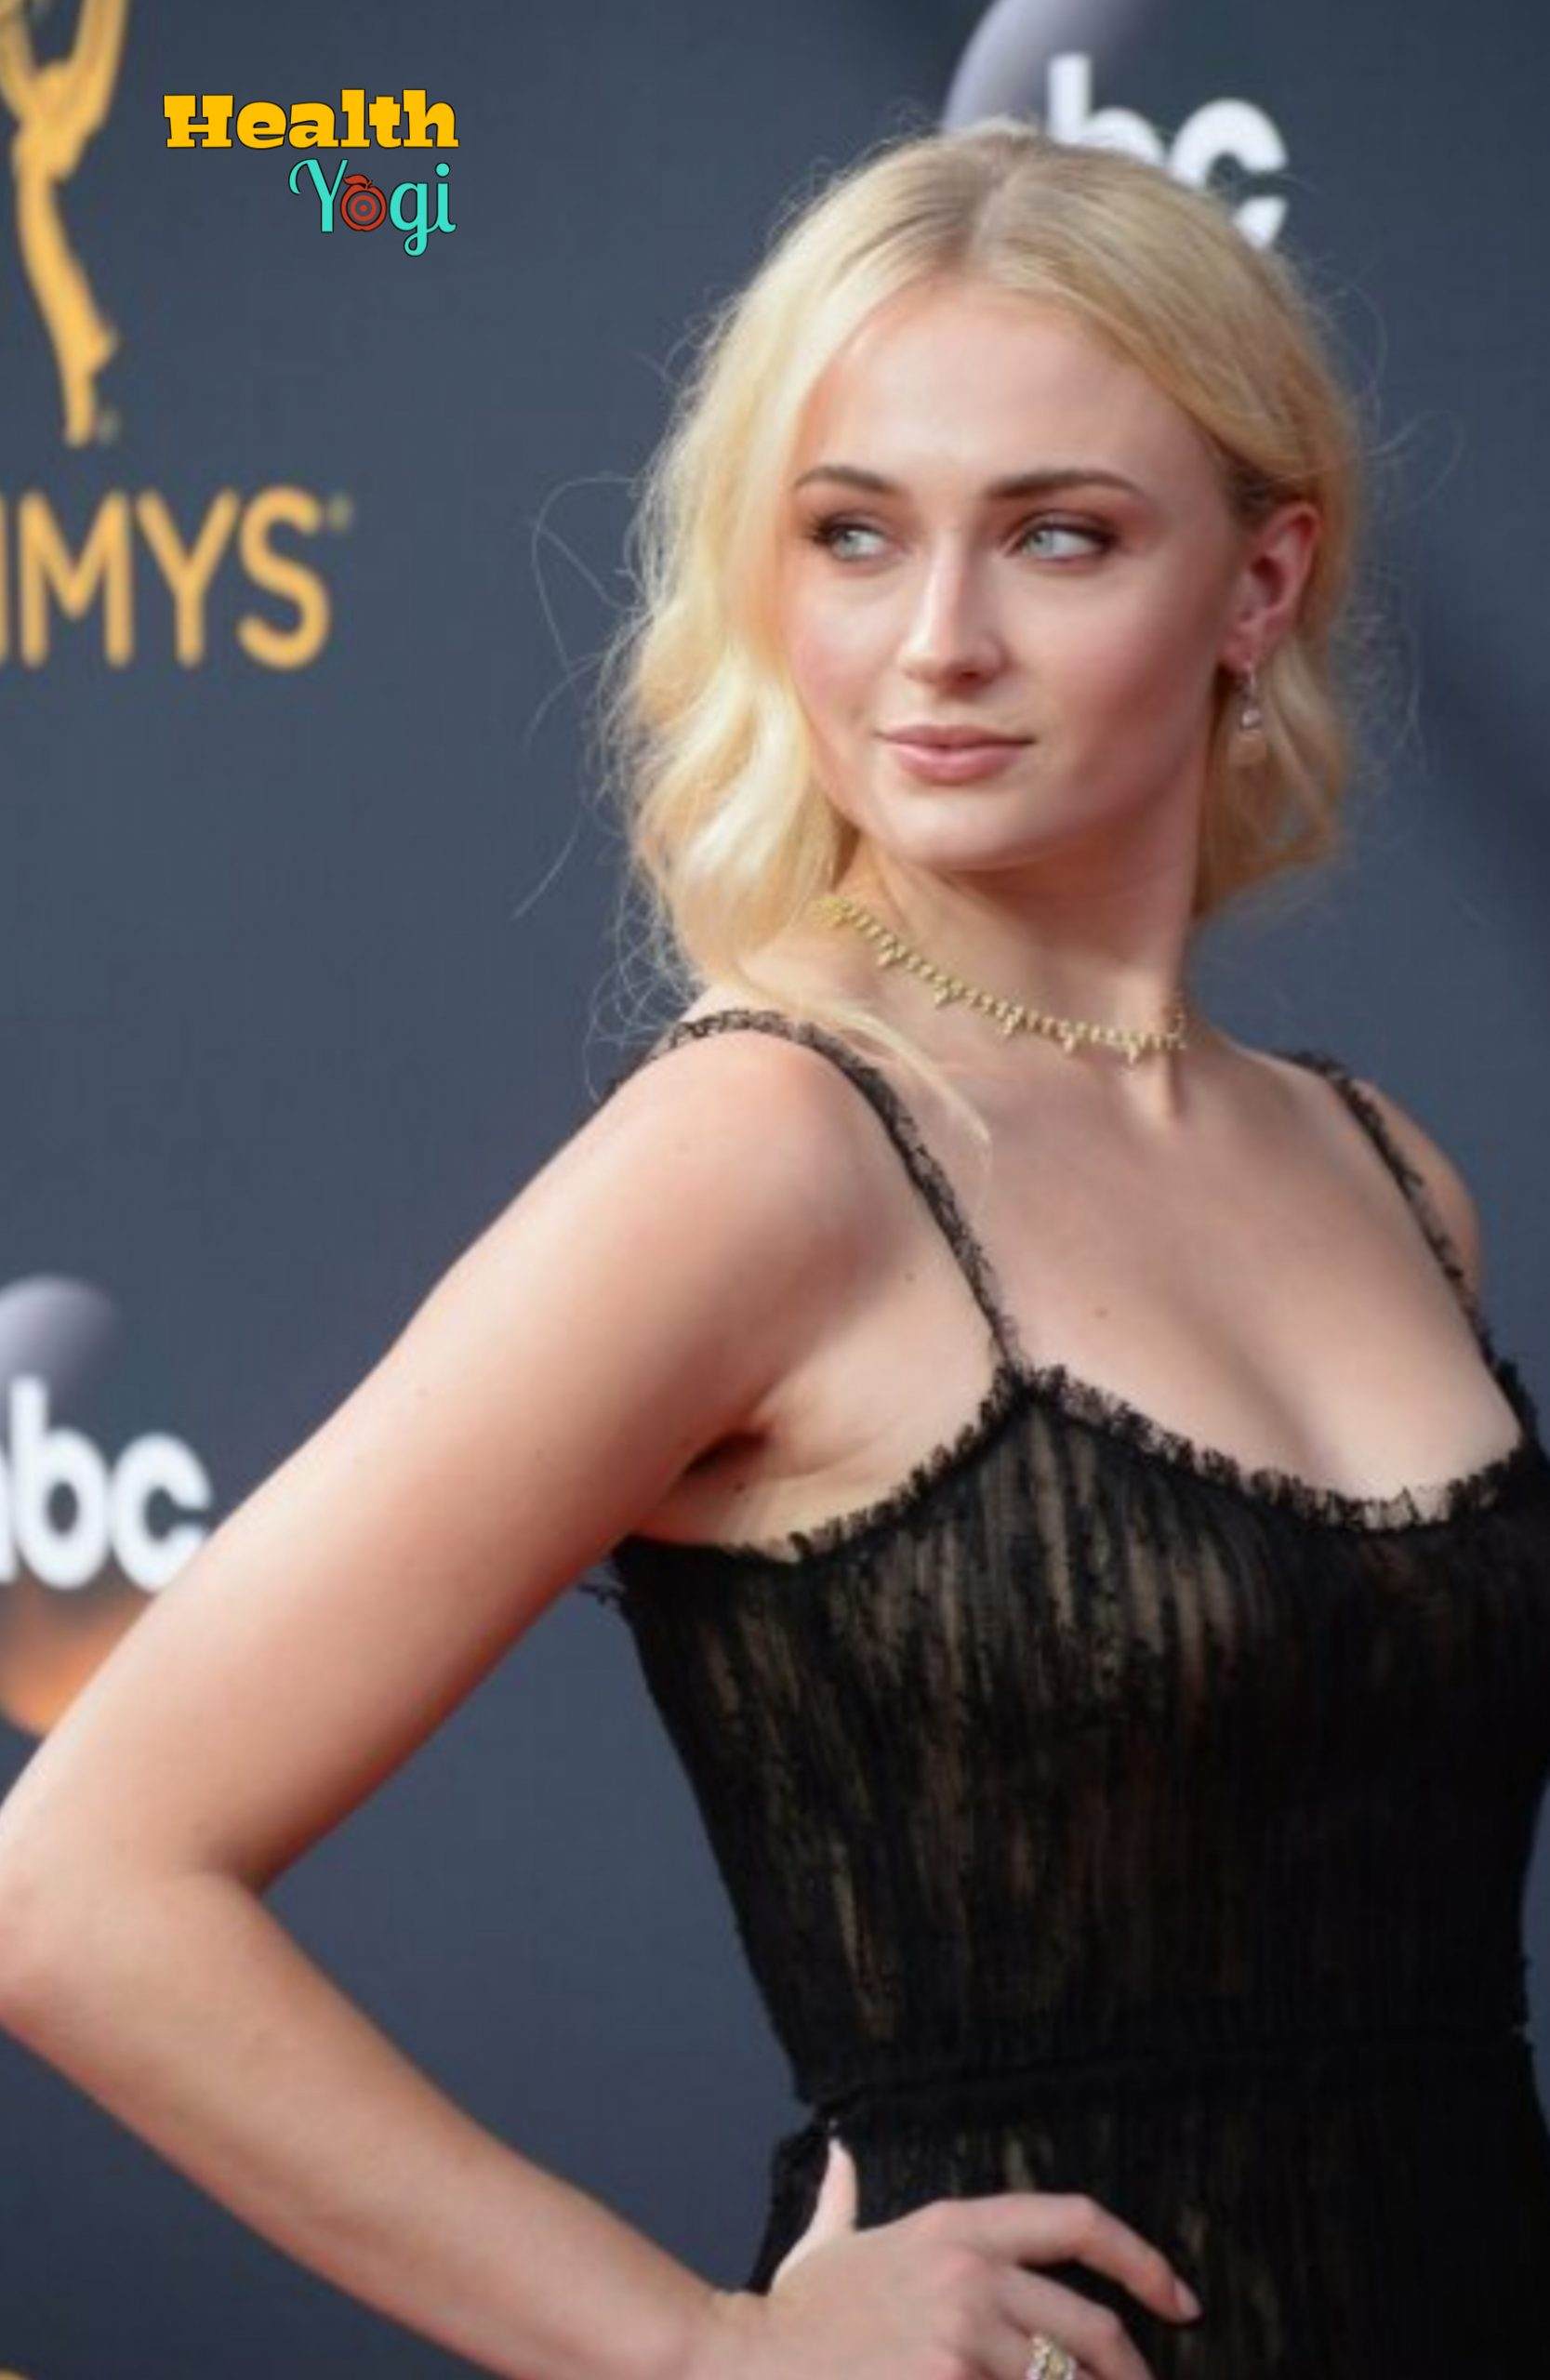 Sophie Turner Diet Plan and Workout Routine